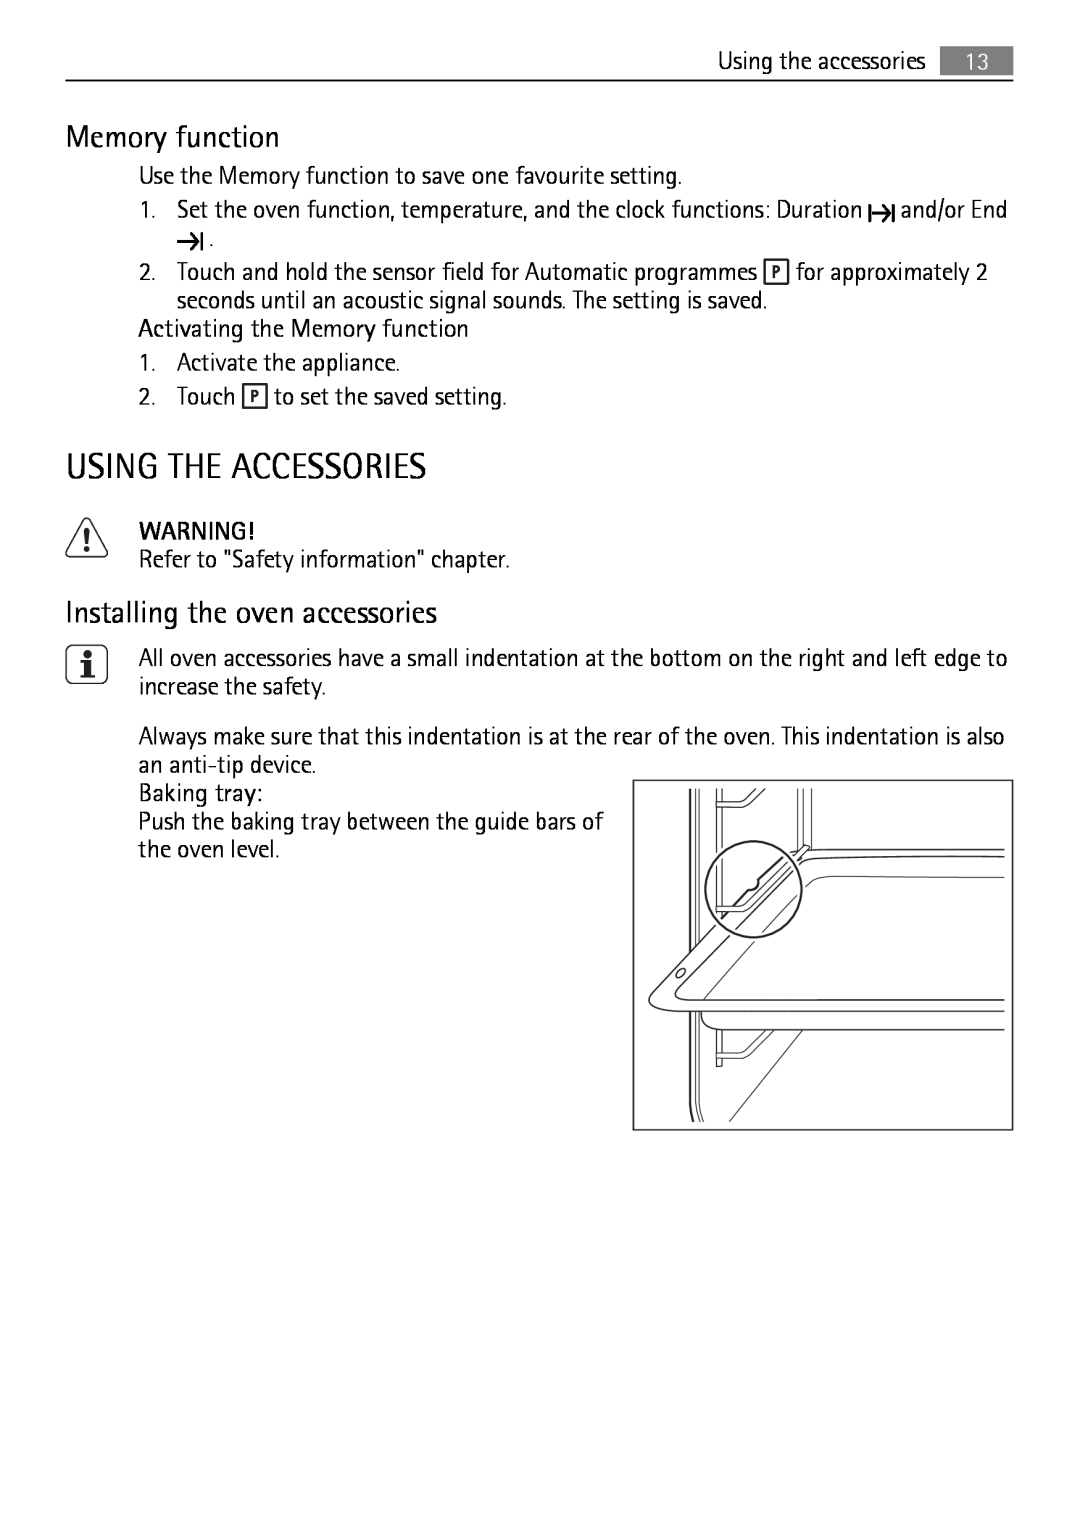 AEG KB7100000 user manual Using The Accessories, Memory function, Installing the oven accessories 